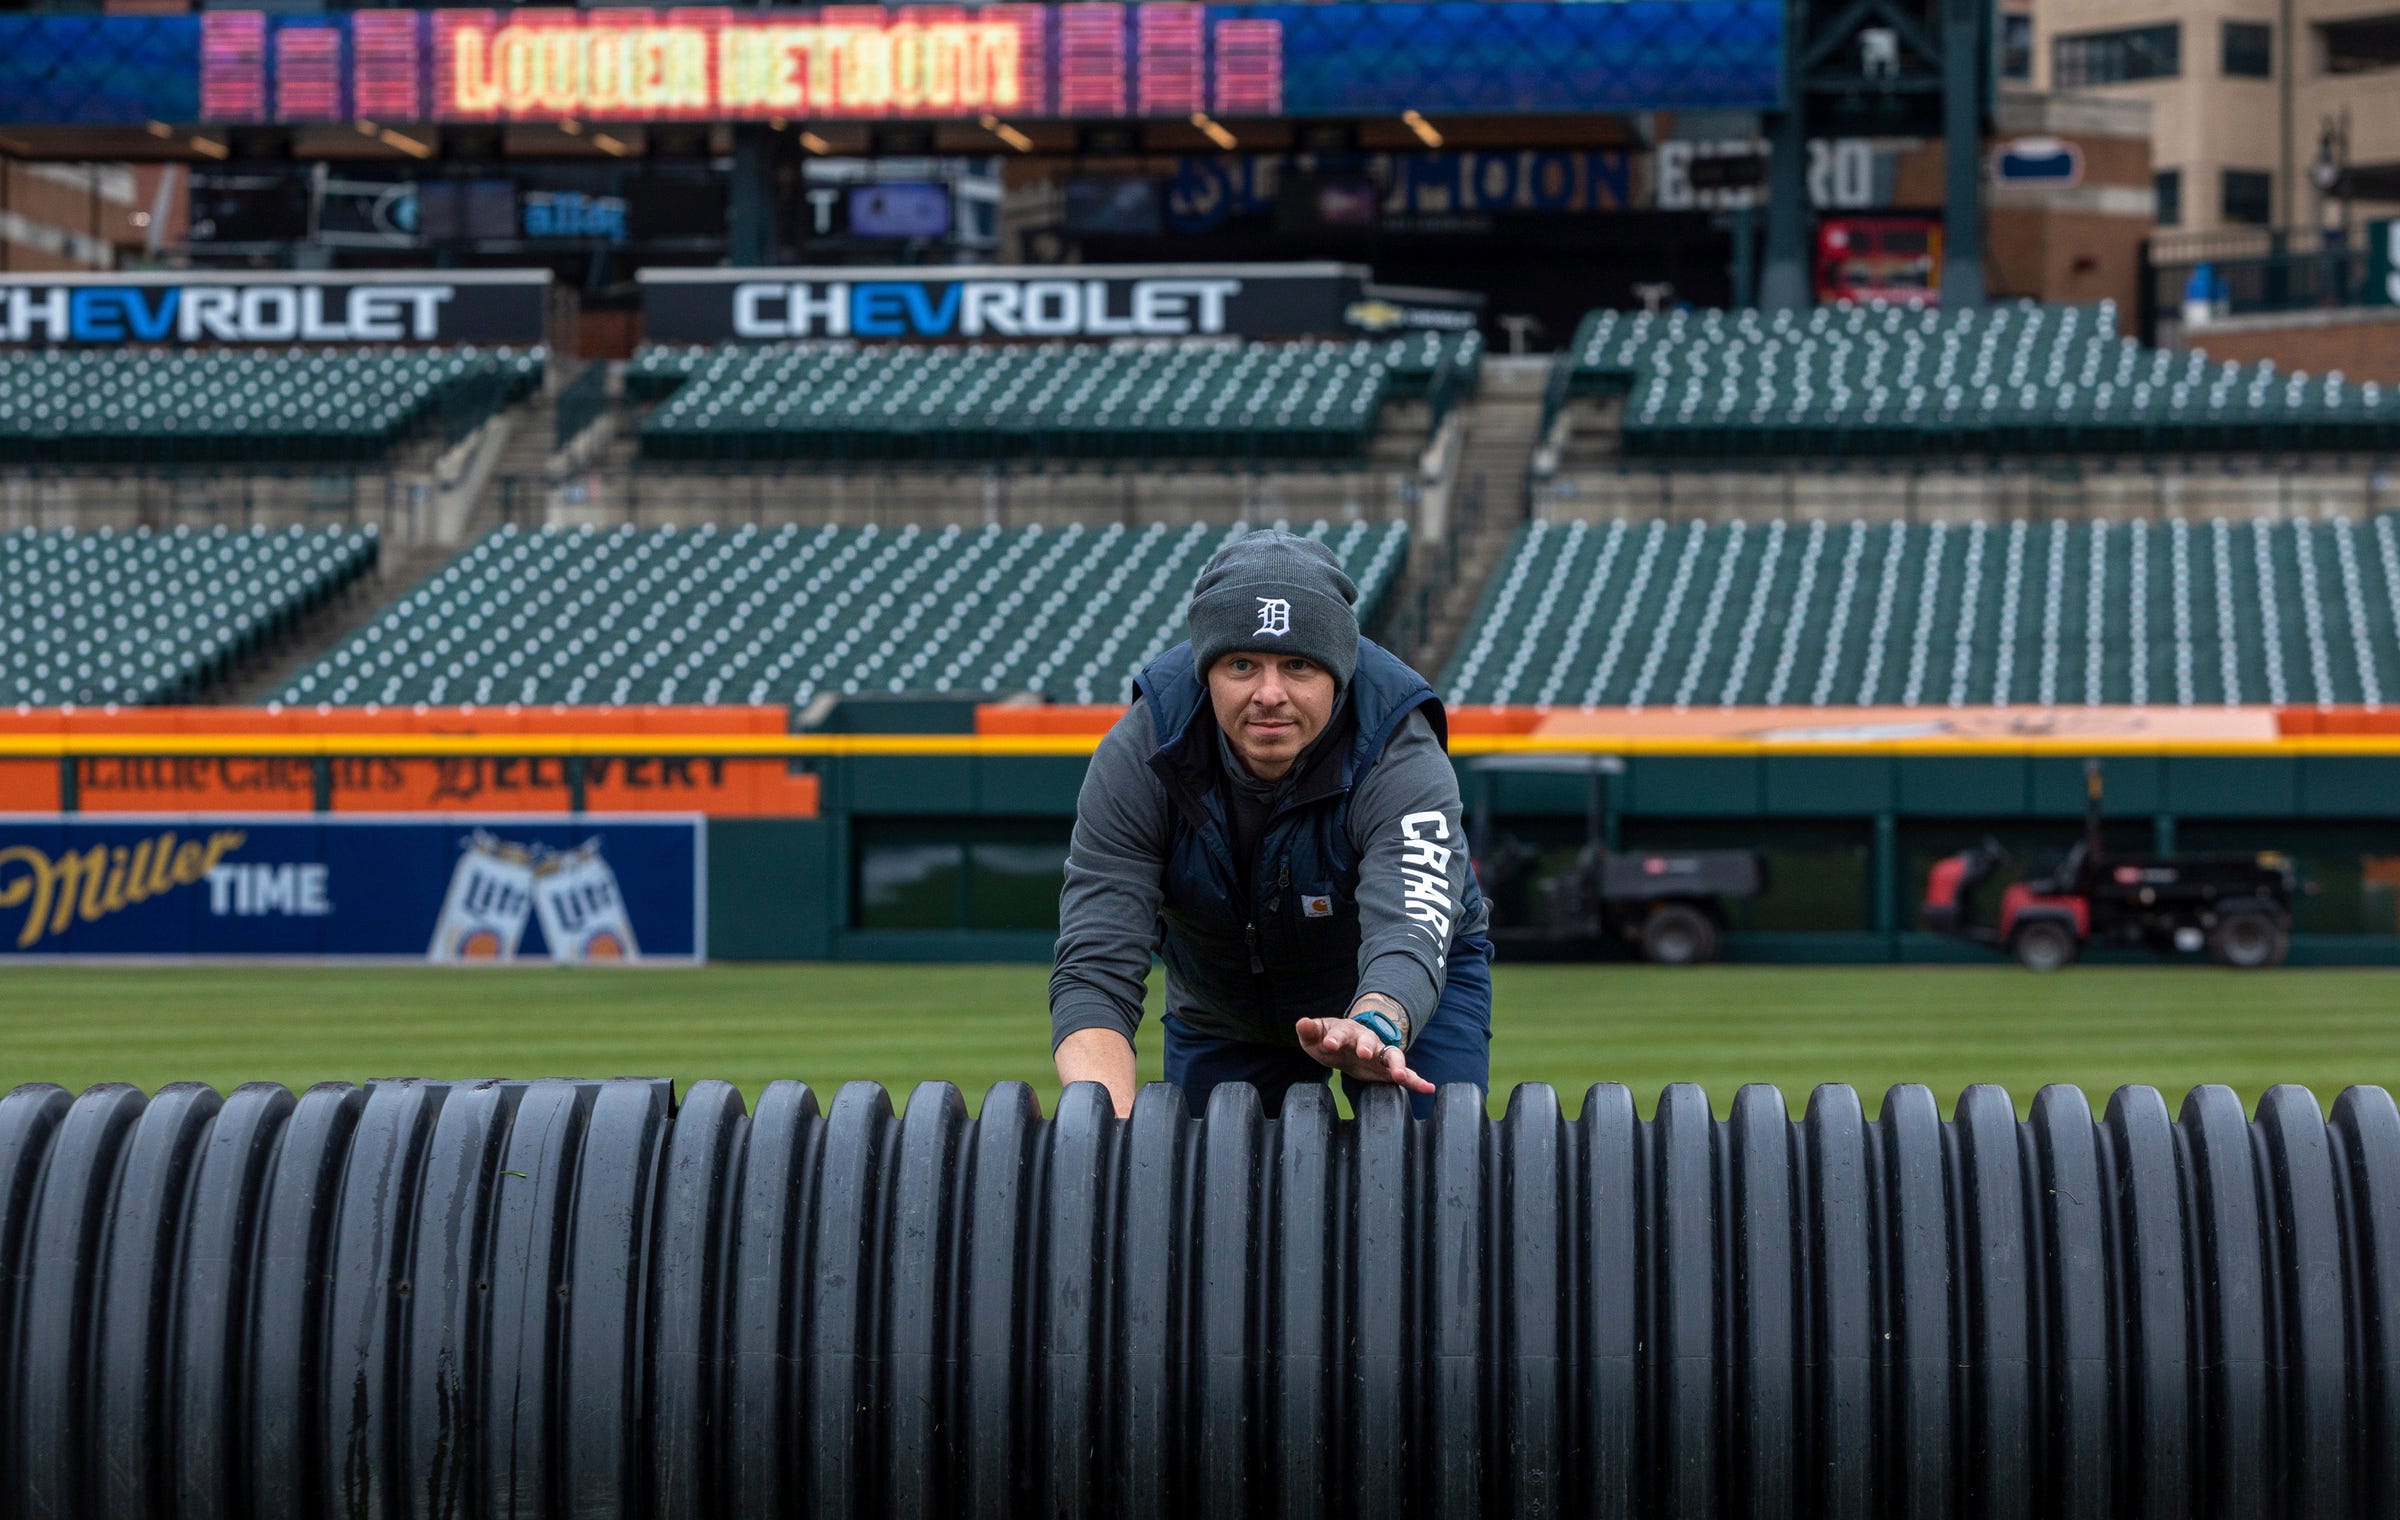 Kyle Pickens, assistant groundskeeper, helps push a giant tube inside Comerica Park on Tuesday, April 4, 2023.